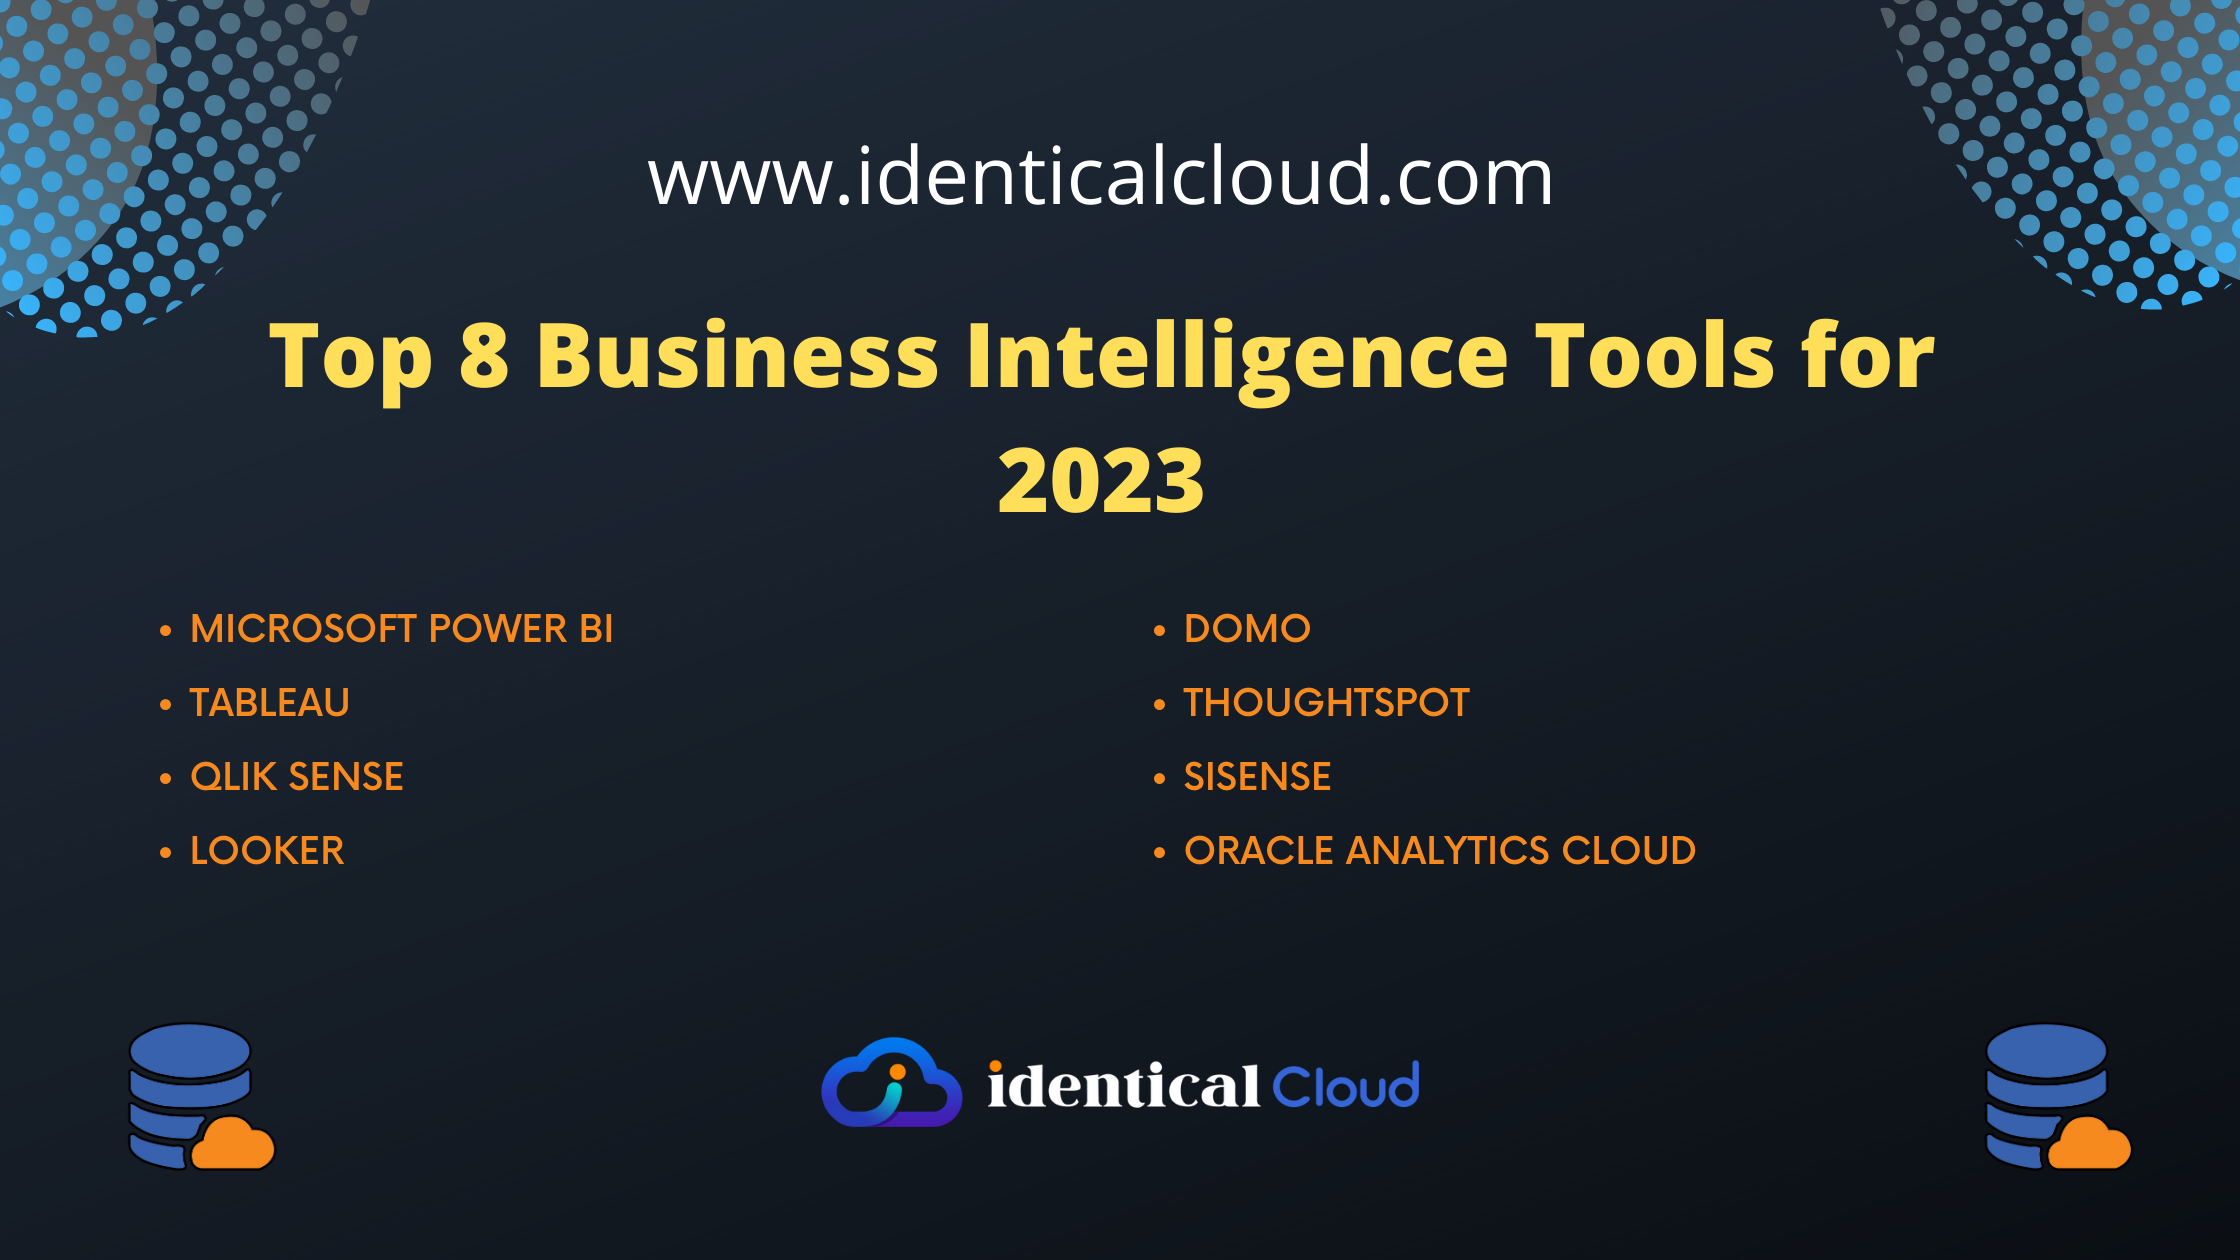 Top 8 Business Intelligence Tools for 2023 - identicalcloud.com